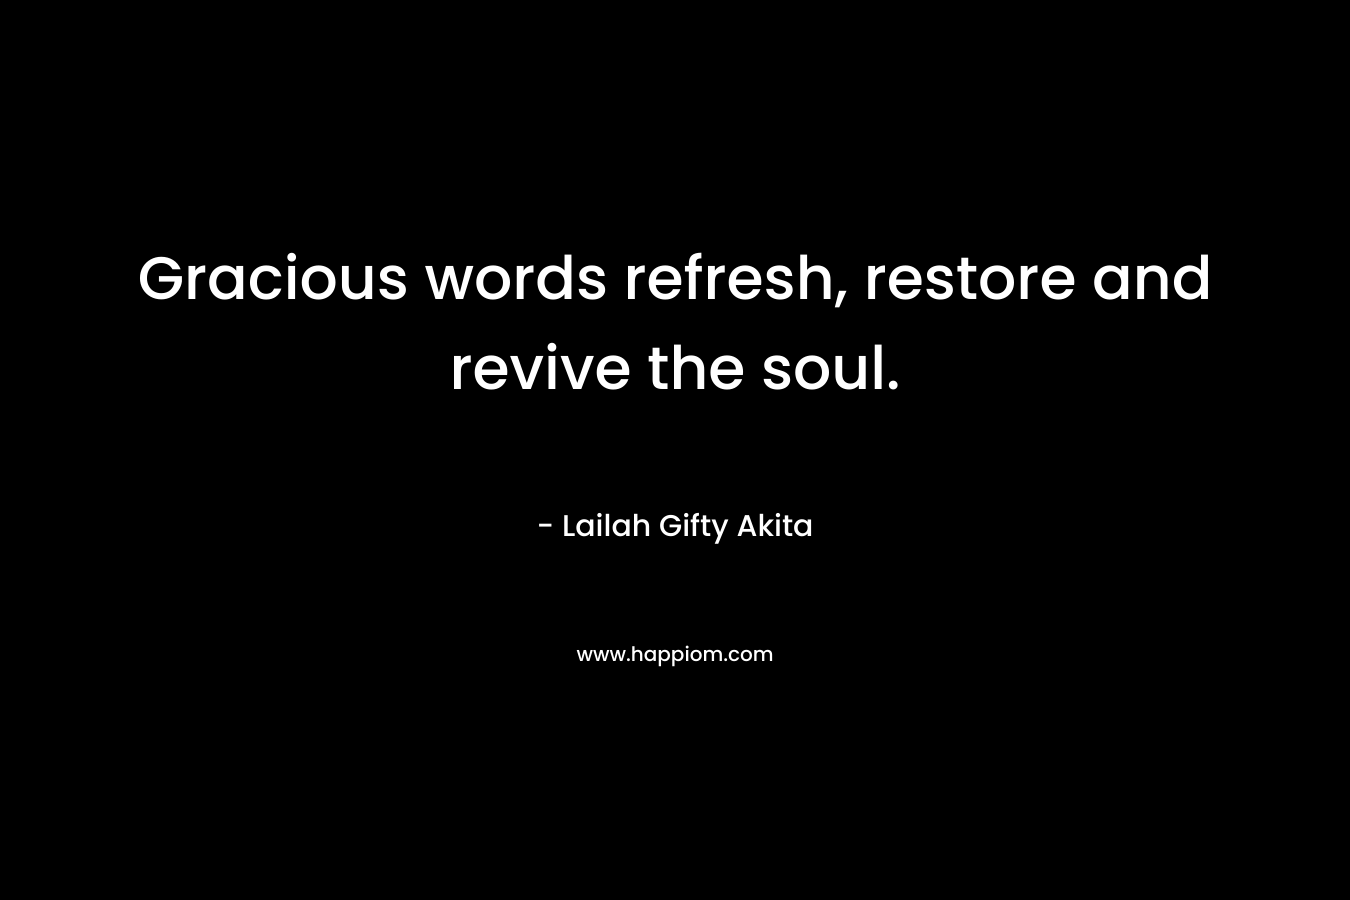 Gracious words refresh, restore and revive the soul. – Lailah Gifty Akita